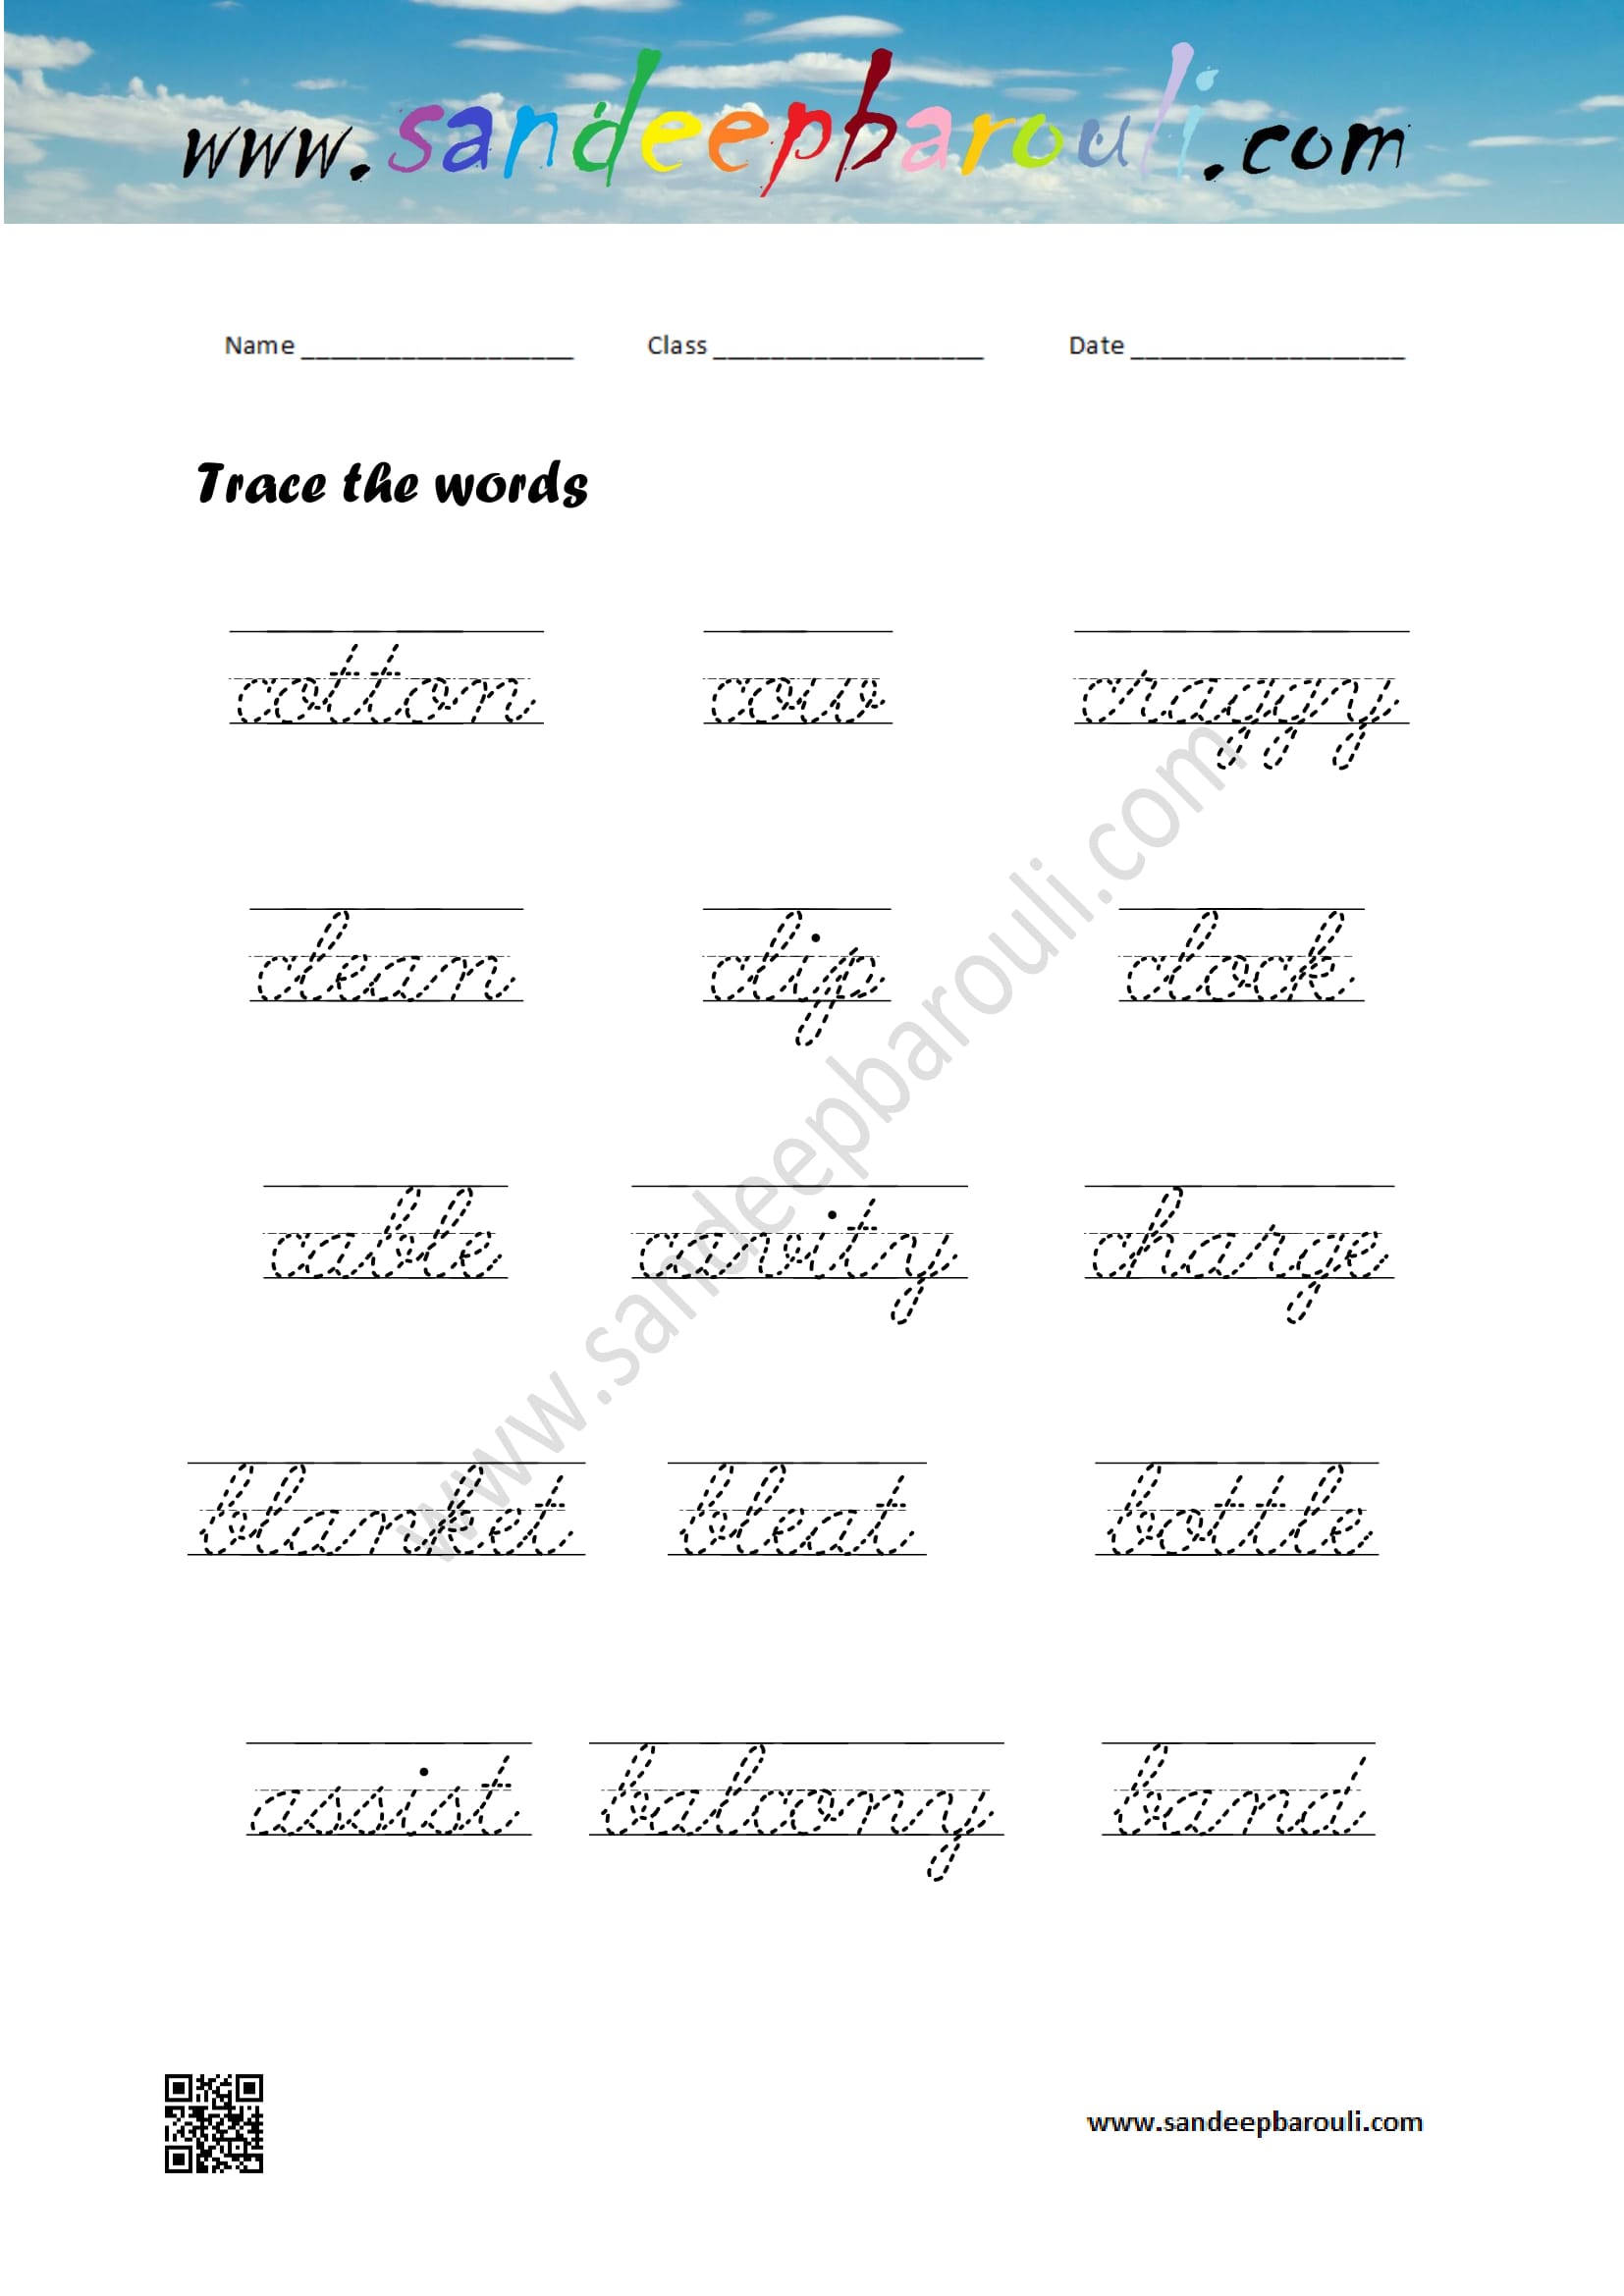 Cursive Writing Worksheet – Trace the words (75)